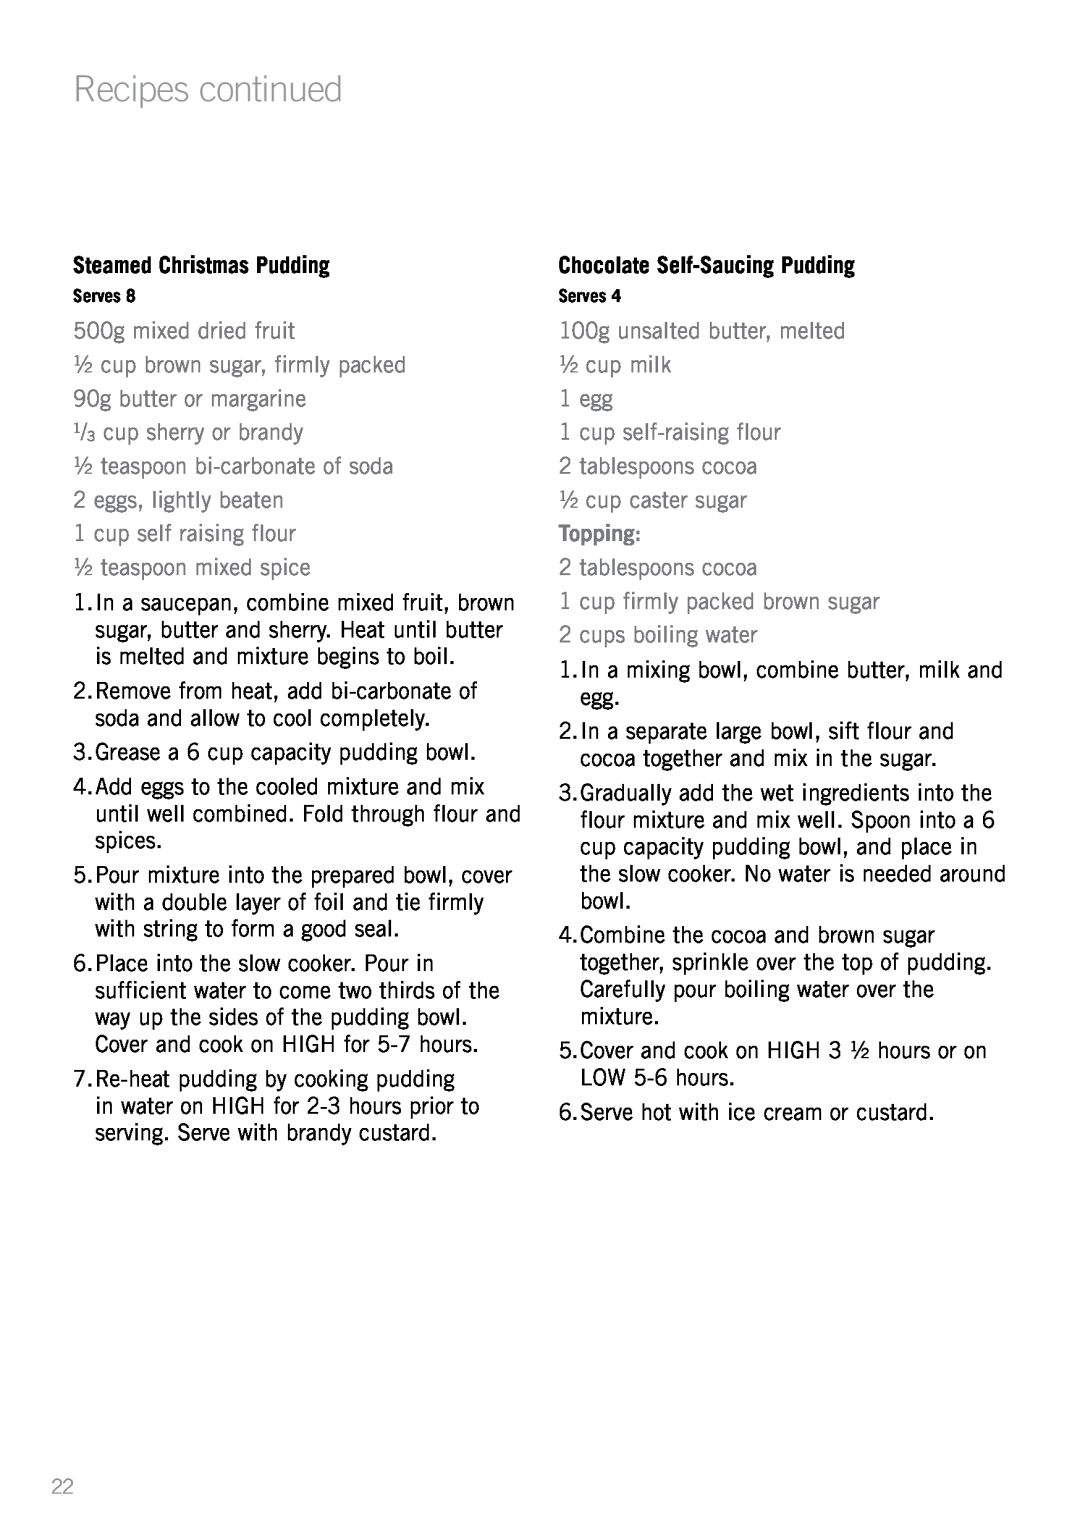 Sunbeam HP5520 manual Steamed Christmas Pudding, Chocolate Self-Saucing Pudding, Recipes continued, Topping 